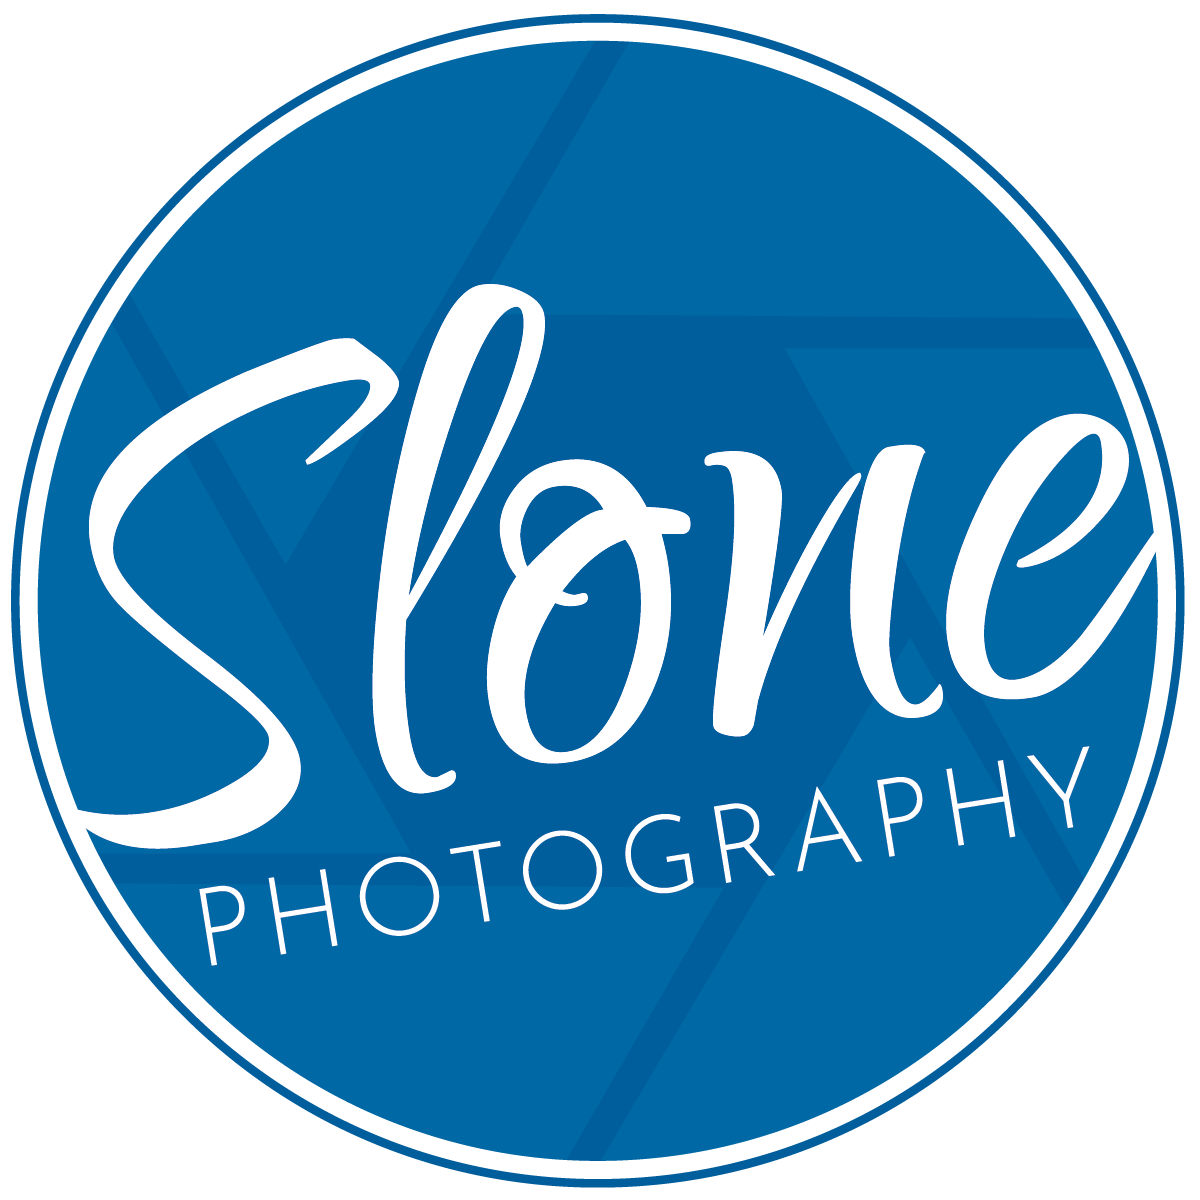 Slone Photography